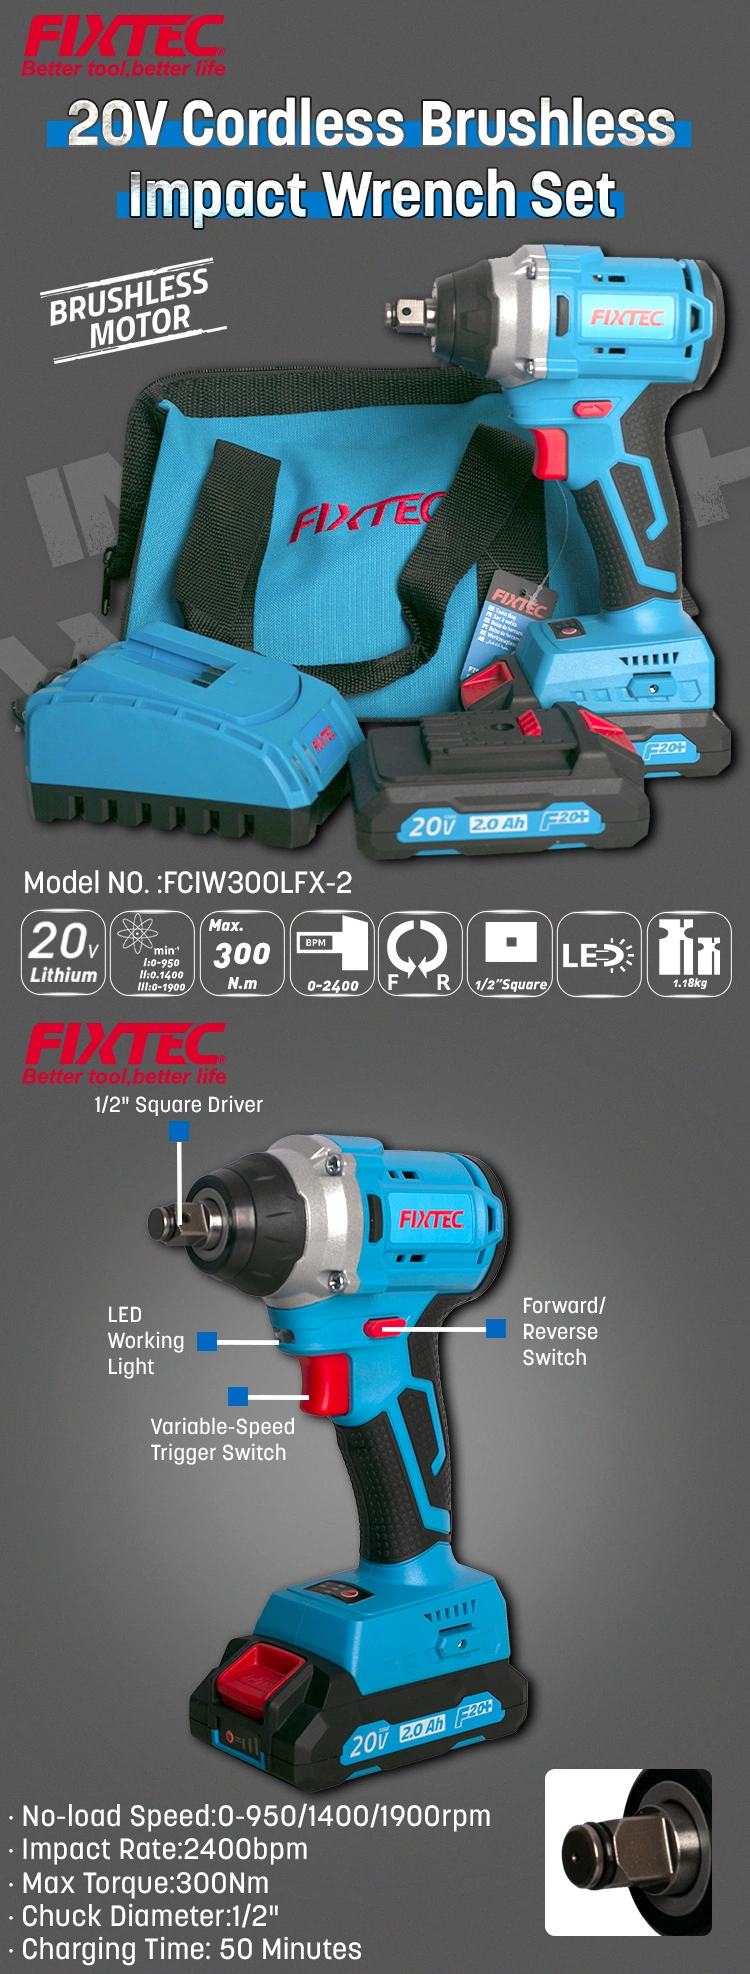 Fixtec 20V 1/2&quot; 2400bpm Impact Rate Electric Brushless Impact Wrench Cordless